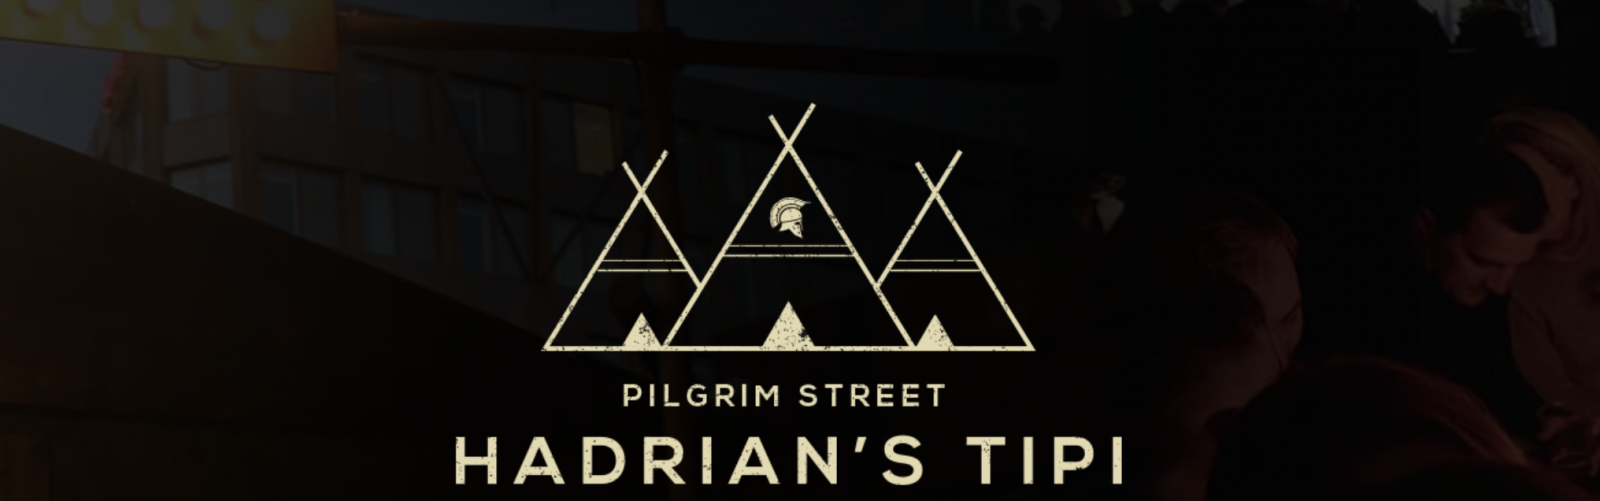 Hadrian's Tipi on Pilgrim Street re-launching october 27th 2017 with added street food village